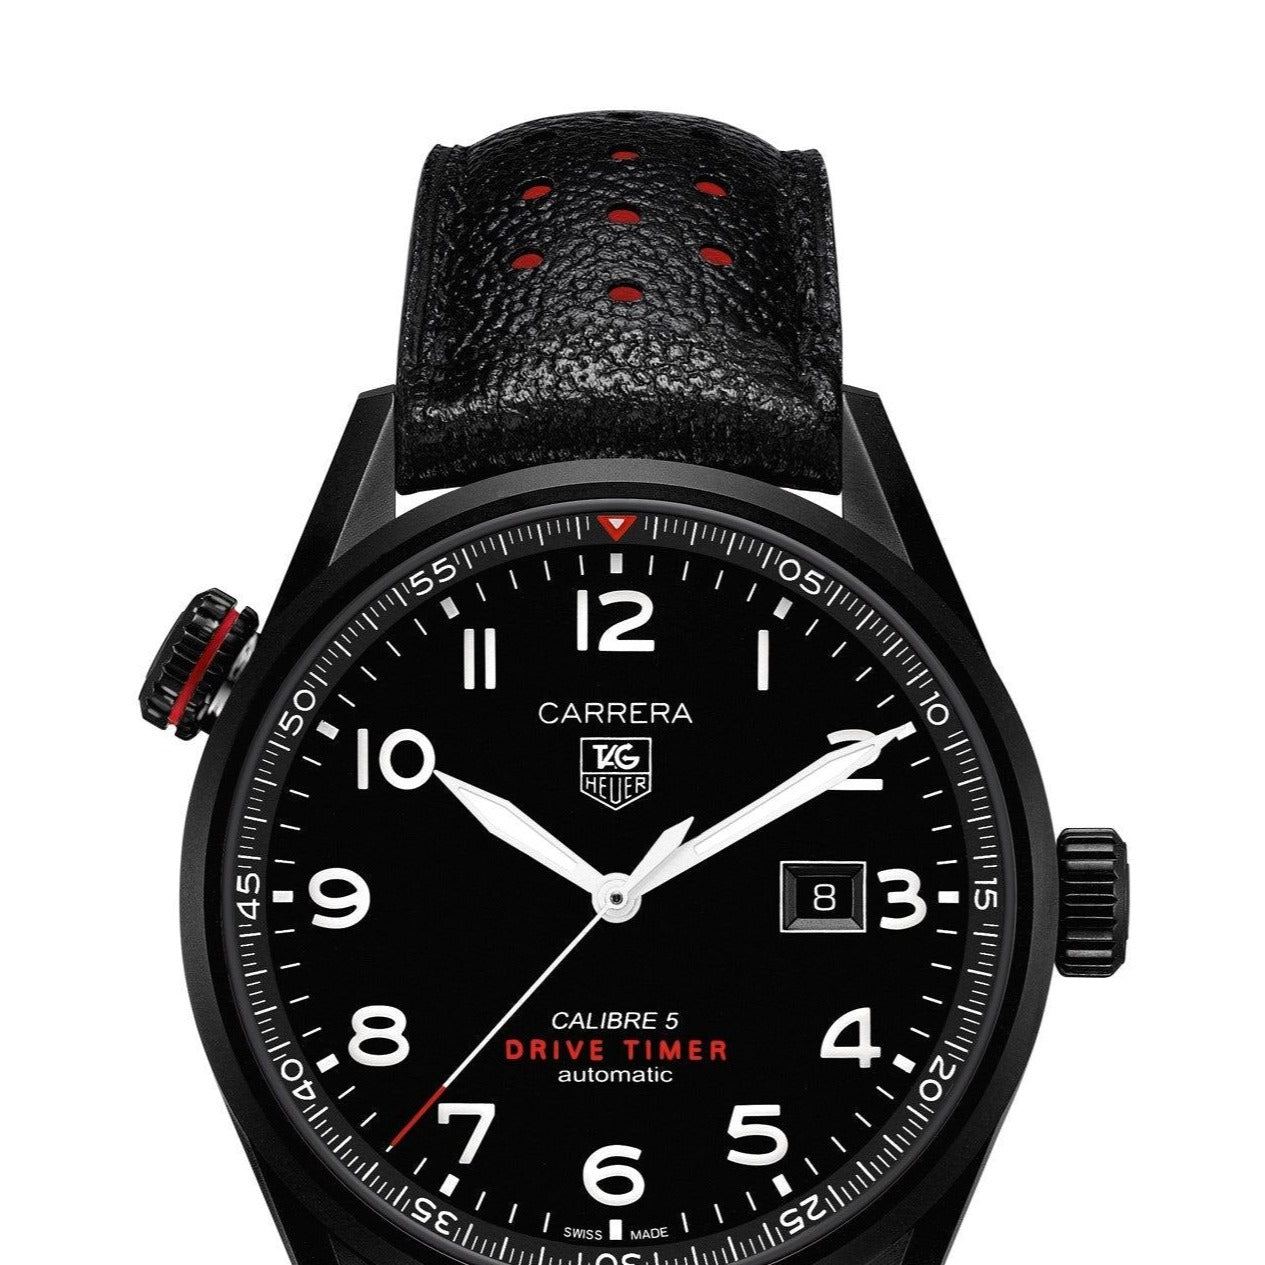 Tag Heuer Carrera Calibre 5 Drive Timer Black Dial Black Leather Strap Watch for Men - WAR2A80.FC6337